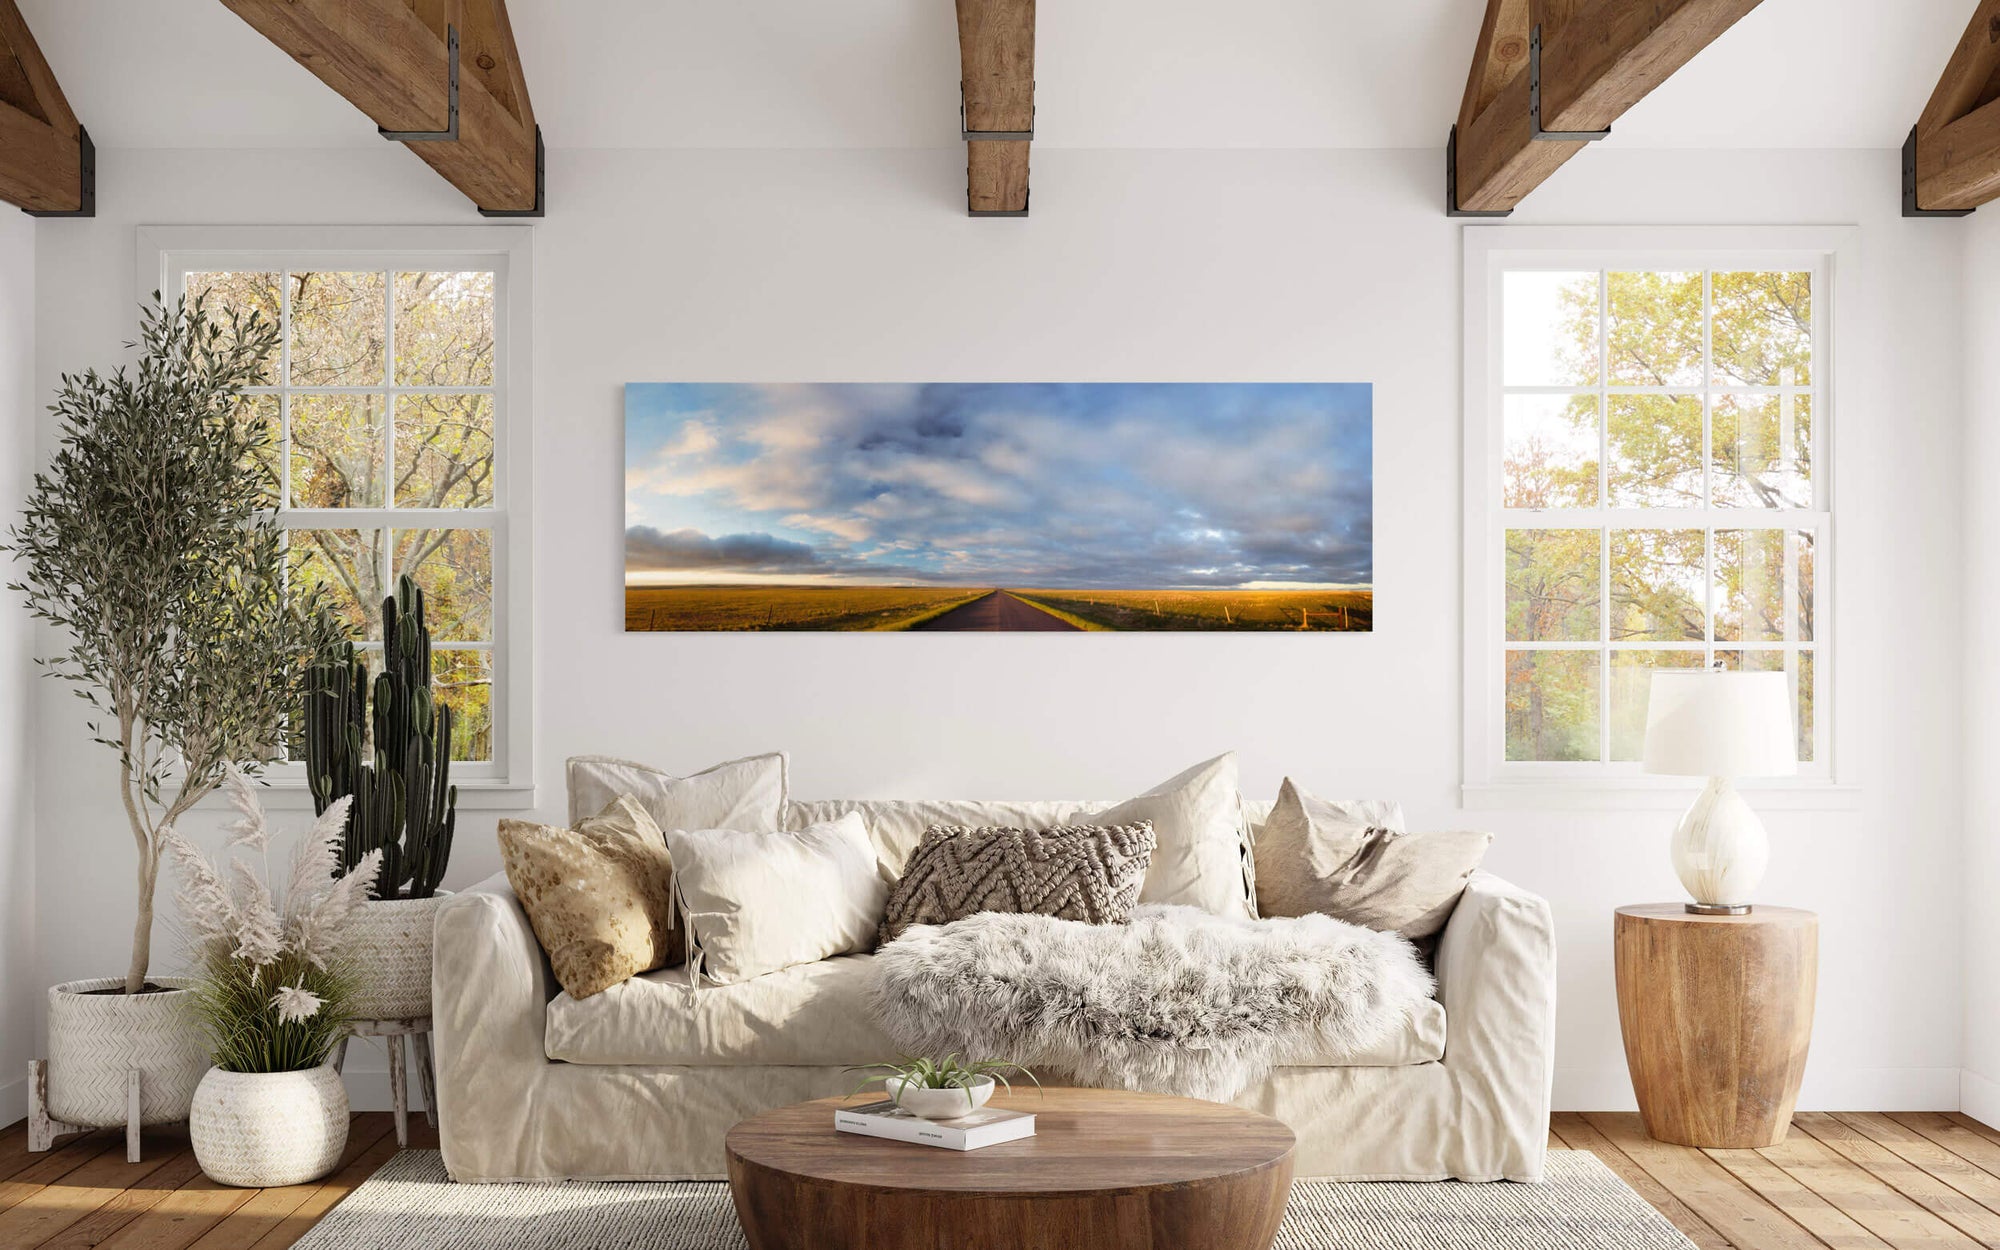 A Colorado Eastern Plains picture hangs in a living room.